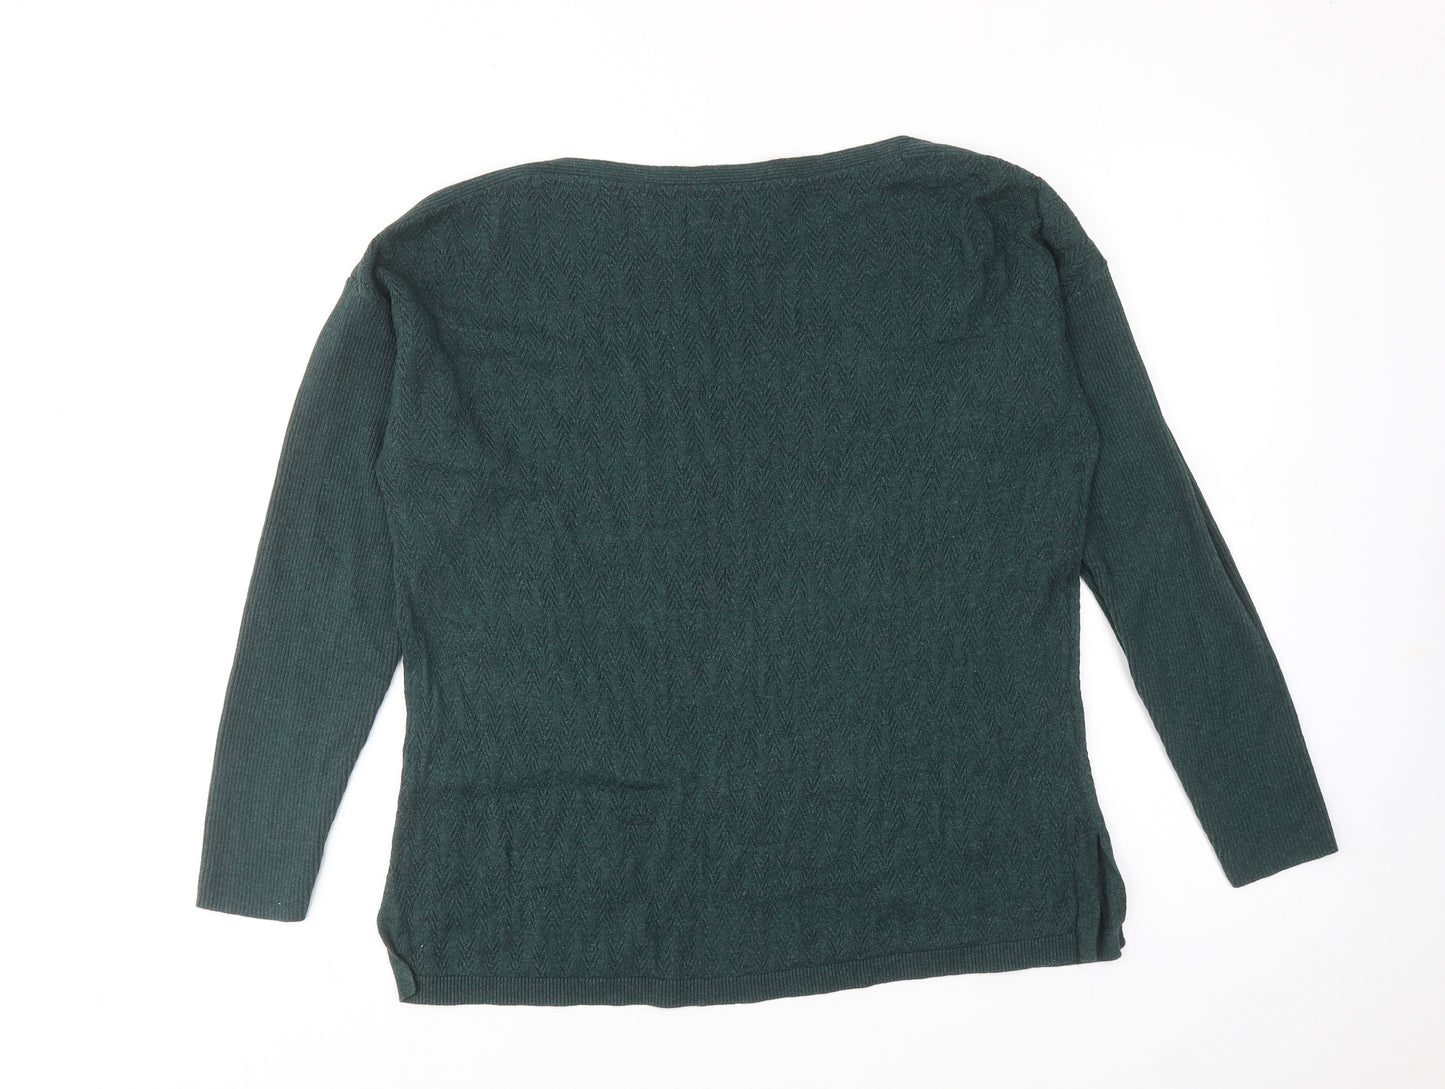 Fat Face Womens Green Round Neck Cotton Pullover Jumper Size 12